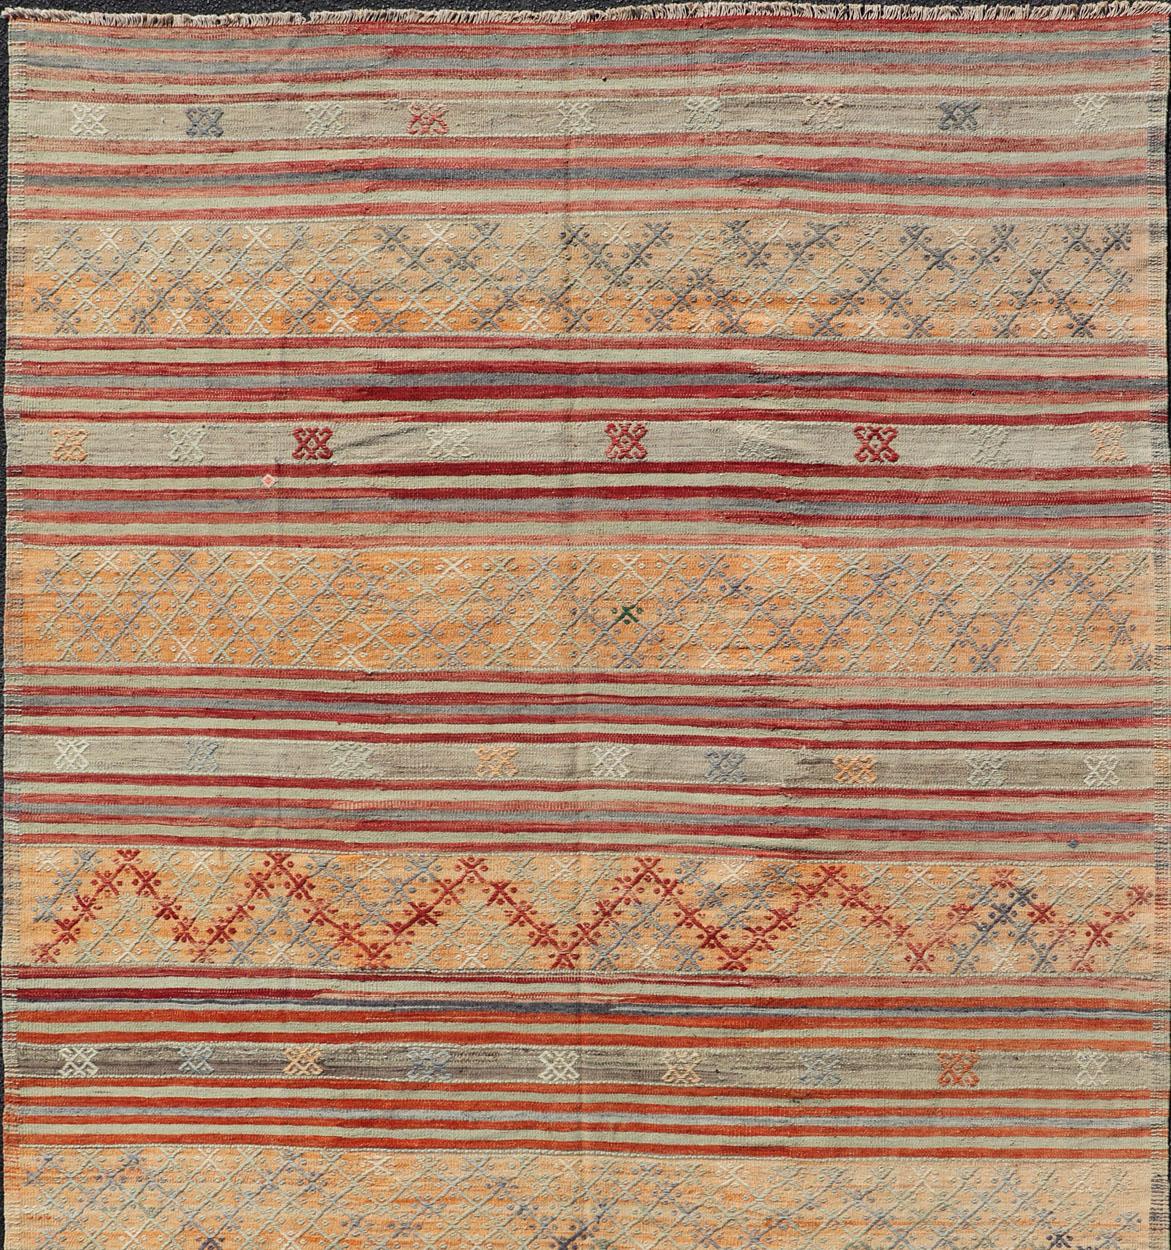 Colorful Vintage Turkish Embroidered Kilim with Stripes and Geometric Motifs.
Geometric stripe design Kilim runner in multi-colors and softer tones, Keivan Woven Arts/ rug / TU-NED-1039, country of origin / type: Turkey / Kilim, circa